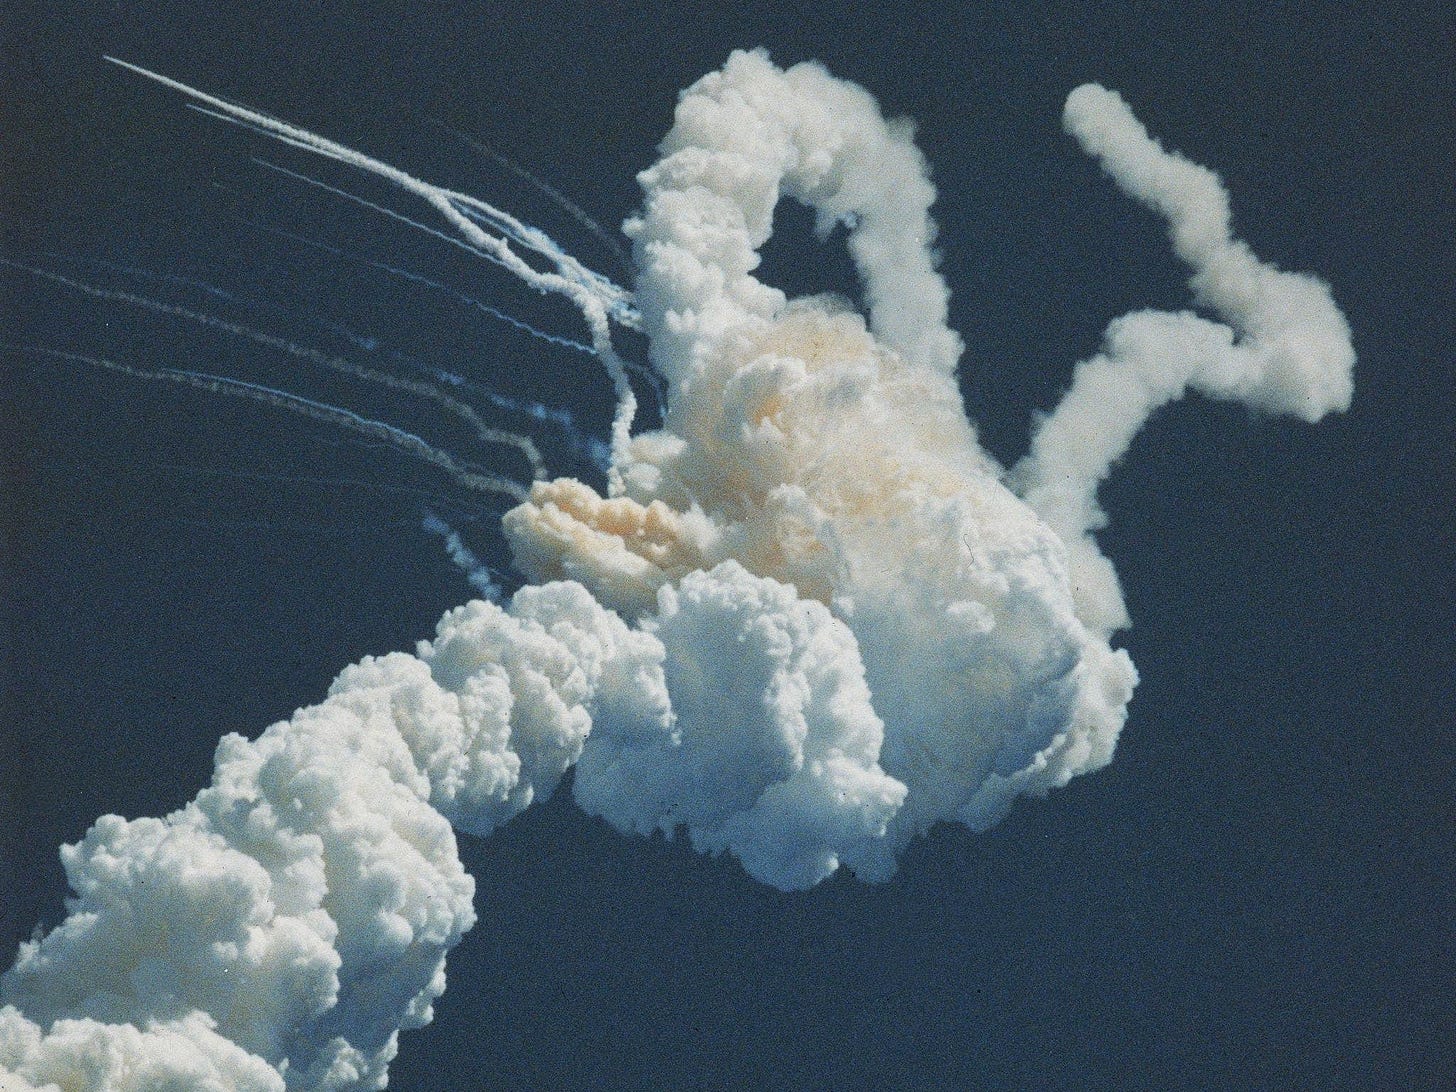 Watching the Challenger Shuttle Explode | The New Yorker